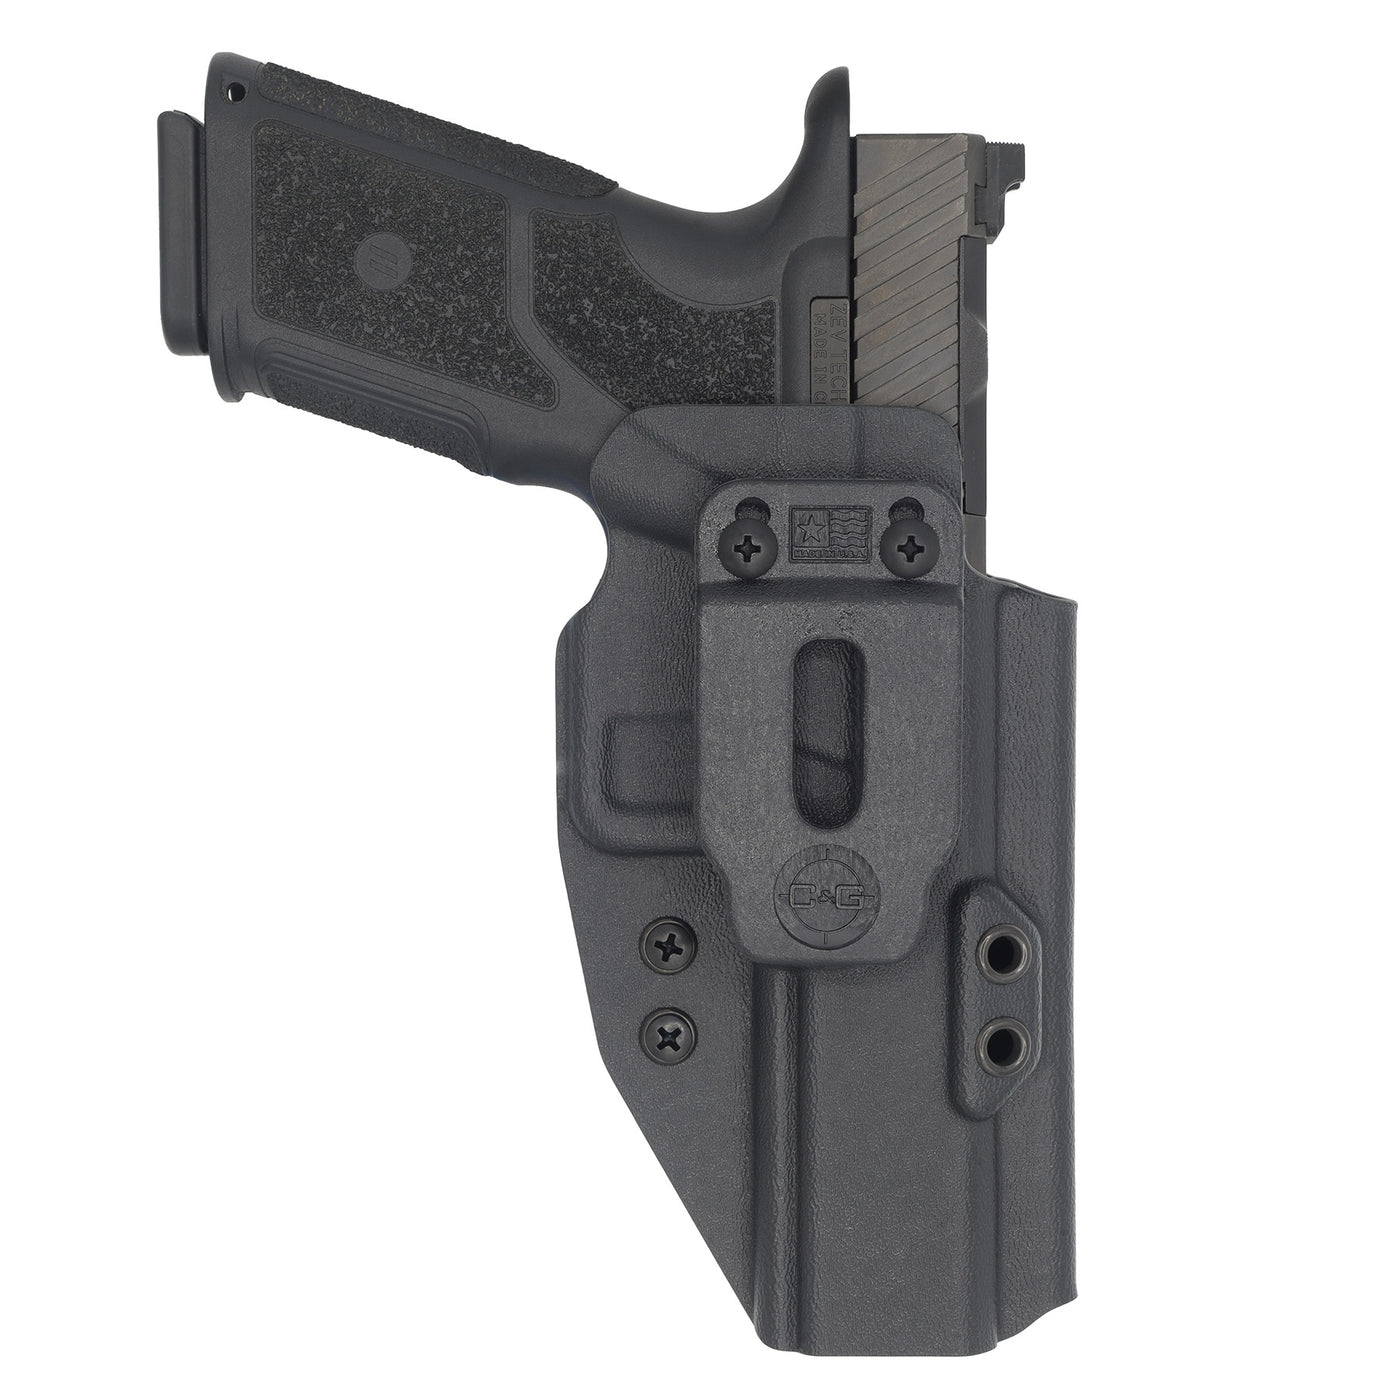 ZEV Technologies OZ9 in a C&G Holsters Inside the waistband Covert holster in right hand holstered.